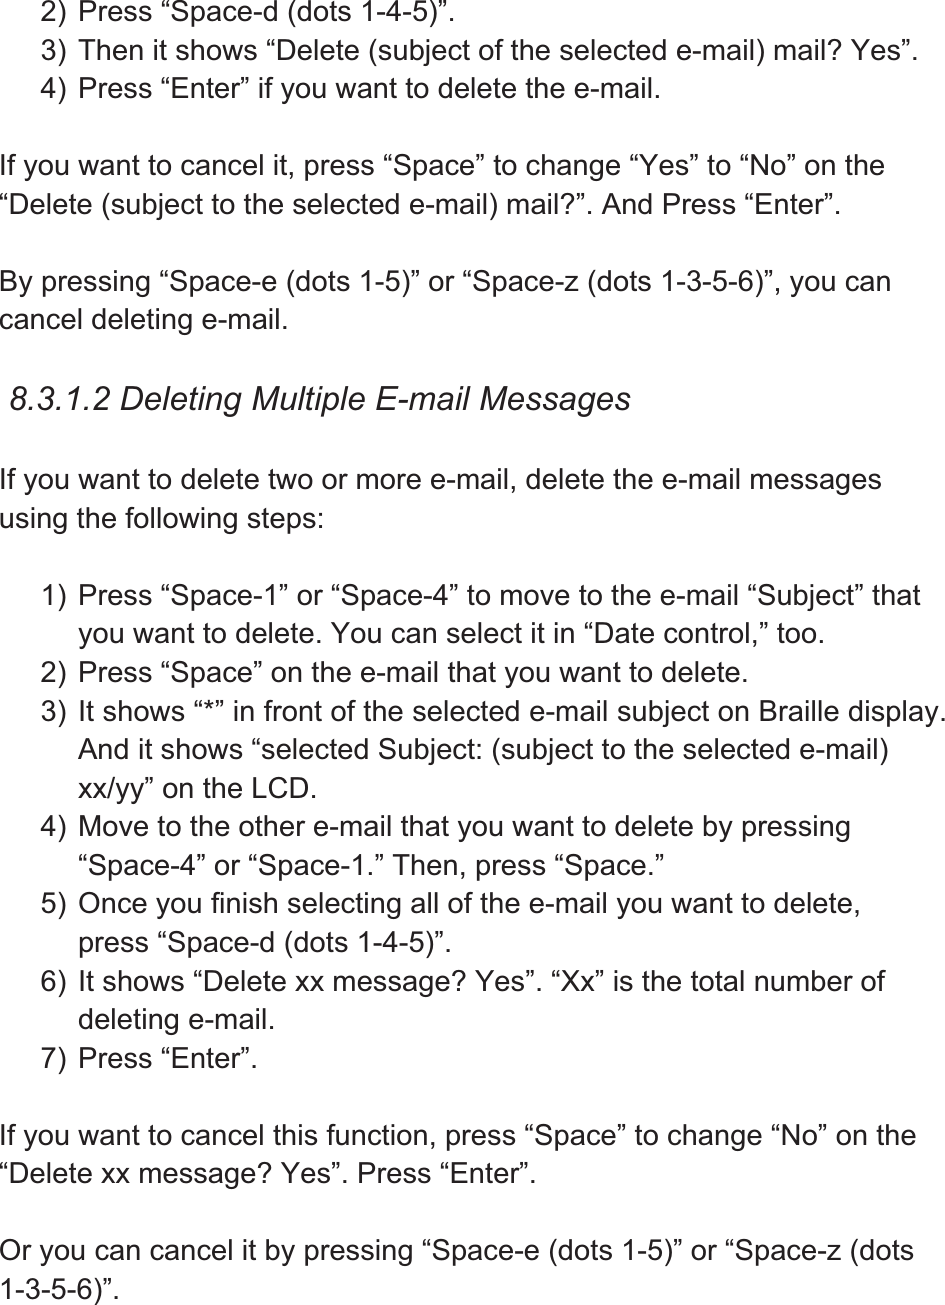 2) Press “Space-d (dots 1-4-5)”.   3) Then it shows “Delete (subject of the selected e-mail) mail? Yes”. 4) Press “Enter” if you want to delete the e-mail. If you want to cancel it, press “Space” to change “Yes” to “No” on the “Delete (subject to the selected e-mail) mail?”. And Press “Enter”. By pressing “Space-e (dots 1-5)” or “Space-z (dots 1-3-5-6)”, you can cancel deleting e-mail.   8.3.1.2 Deleting Multiple E-mail Messages If you want to delete two or more e-mail, delete the e-mail messages using the following steps: 1) Press “Space-1” or “Space-4” to move to the e-mail “Subject” that you want to delete. You can select it in “Date control,” too. 2) Press “Space” on the e-mail that you want to delete.   3) It shows “*” in front of the selected e-mail subject on Braille display. And it shows “selected Subject: (subject to the selected e-mail) xx/yy” on the LCD. 4) Move to the other e-mail that you want to delete by pressing “Space-4” or “Space-1.” Then, press “Space.” 5) Once you finish selecting all of the e-mail you want to delete, press “Space-d (dots 1-4-5)”. 6) It shows “Delete xx message? Yes”. “Xx” is the total number of deleting e-mail.   7) Press “Enter”. If you want to cancel this function, press “Space” to change “No” on the “Delete xx message? Yes”. Press “Enter”.   Or you can cancel it by pressing “Space-e (dots 1-5)” or “Space-z (dots 1-3-5-6)”.